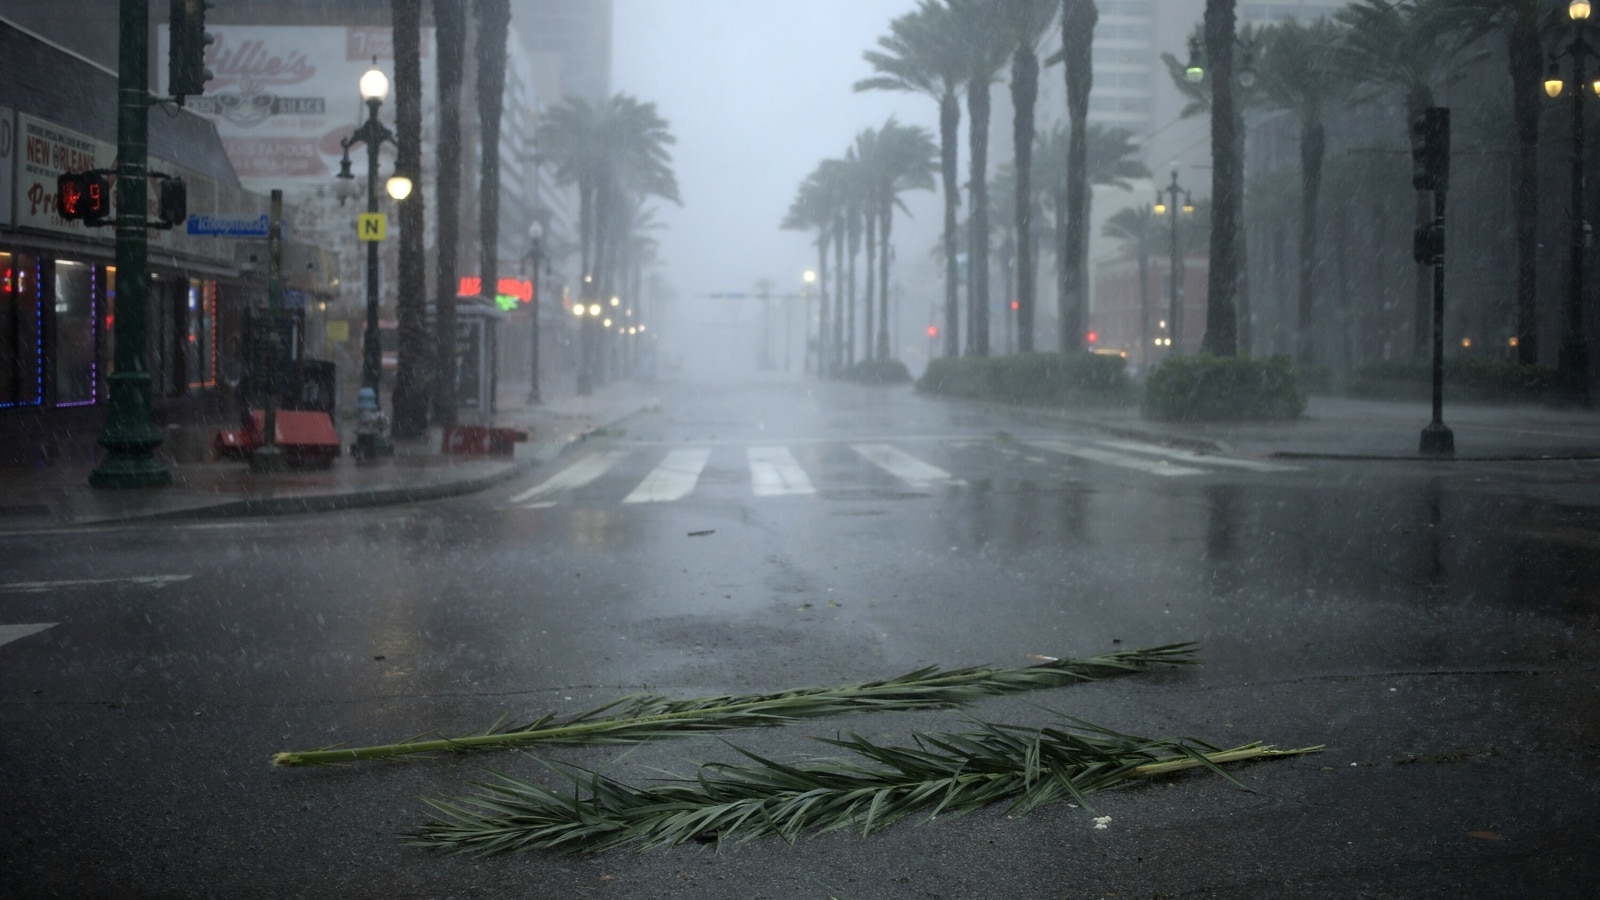 Hurricane Ida lashes Louisiana, knocking out power in New Orleans